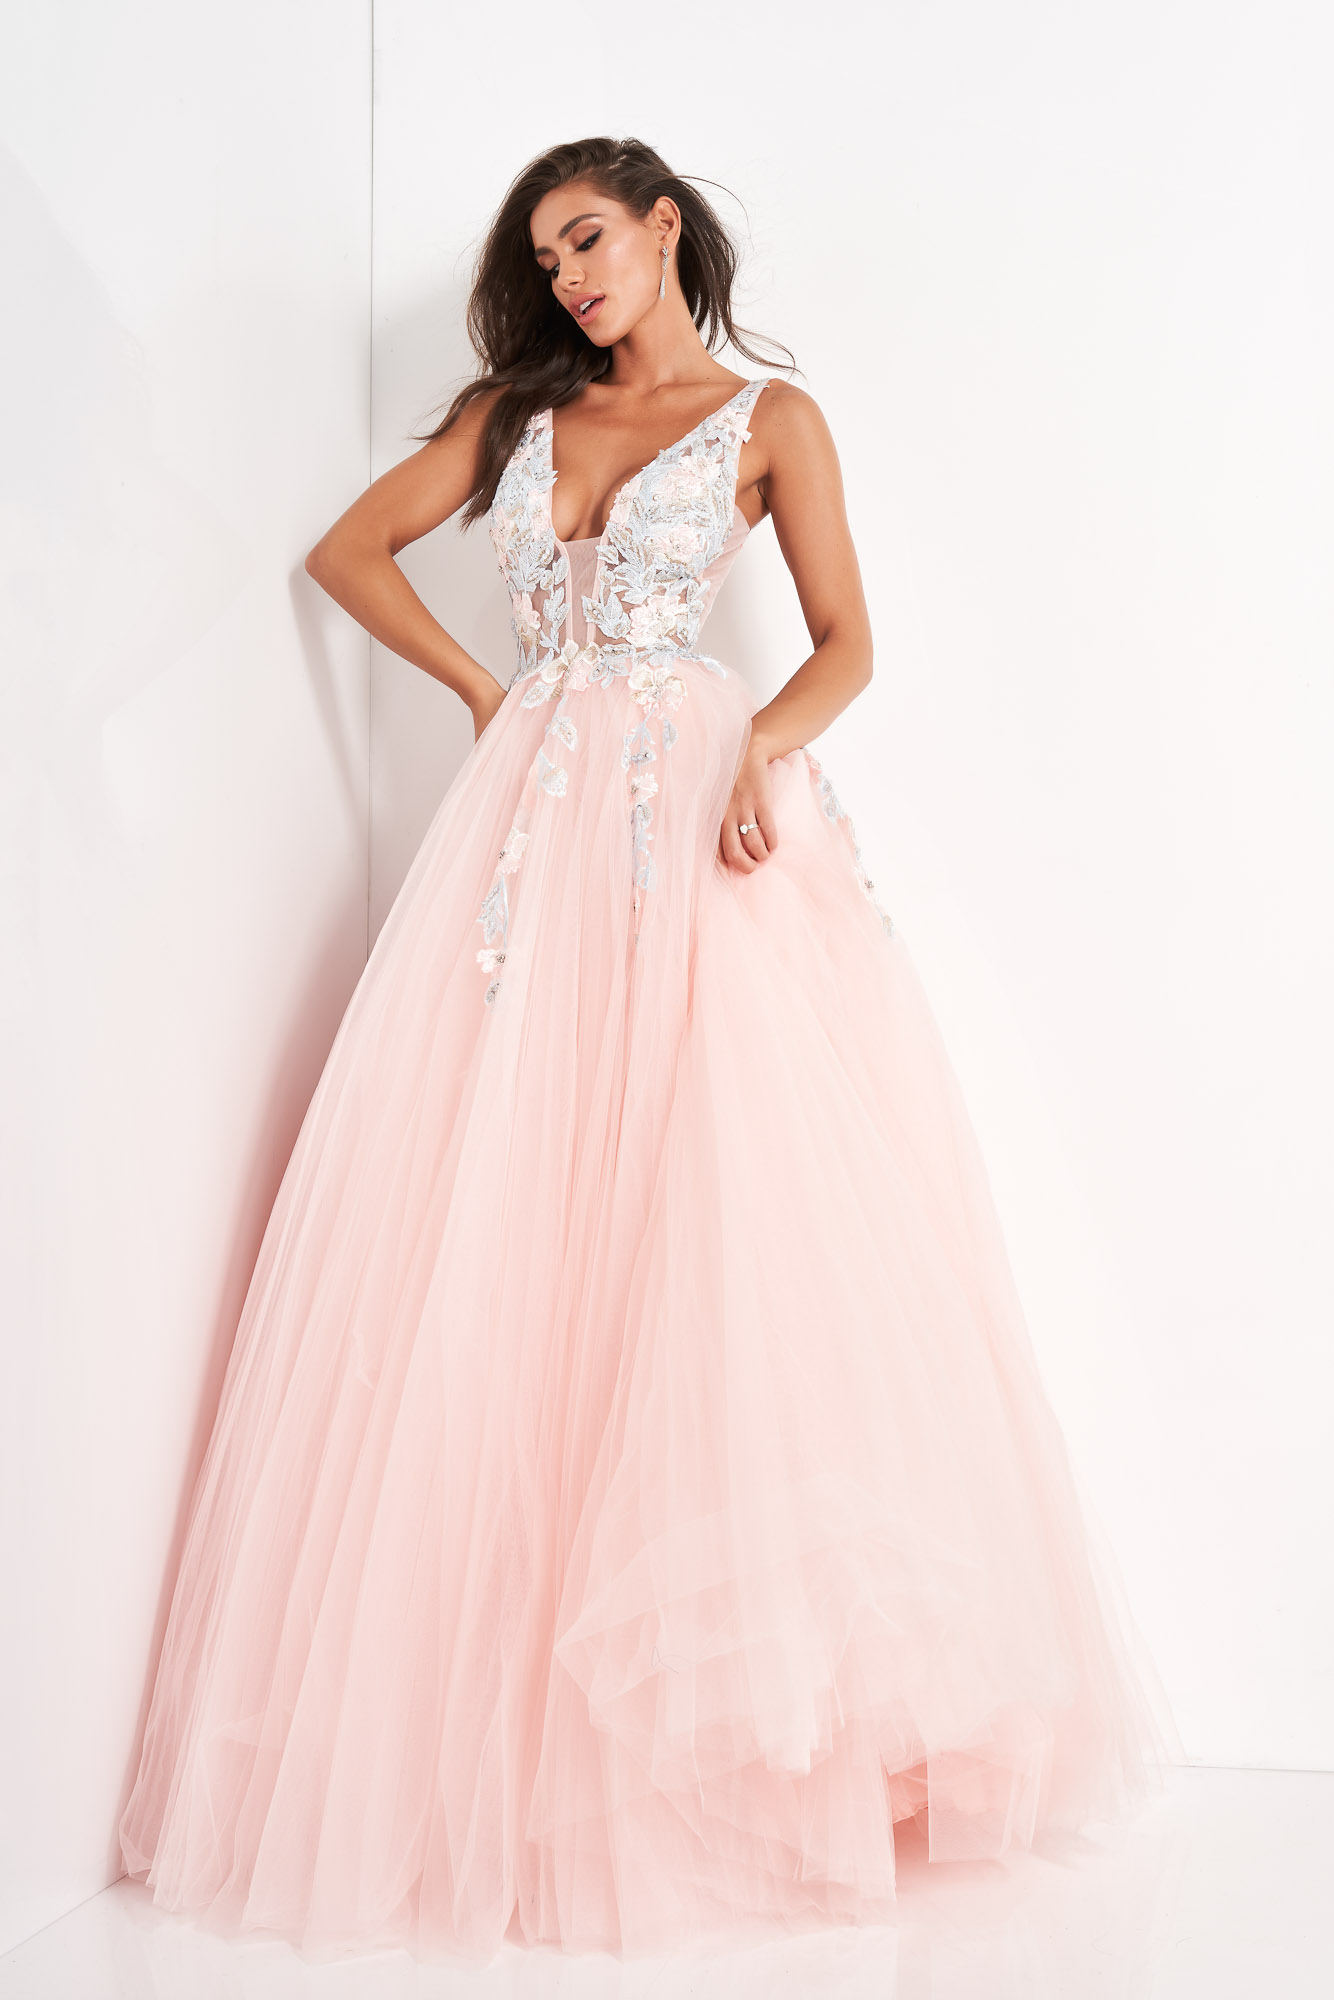 Blush Tulle Floral Embroidered Party Ballgown 11092